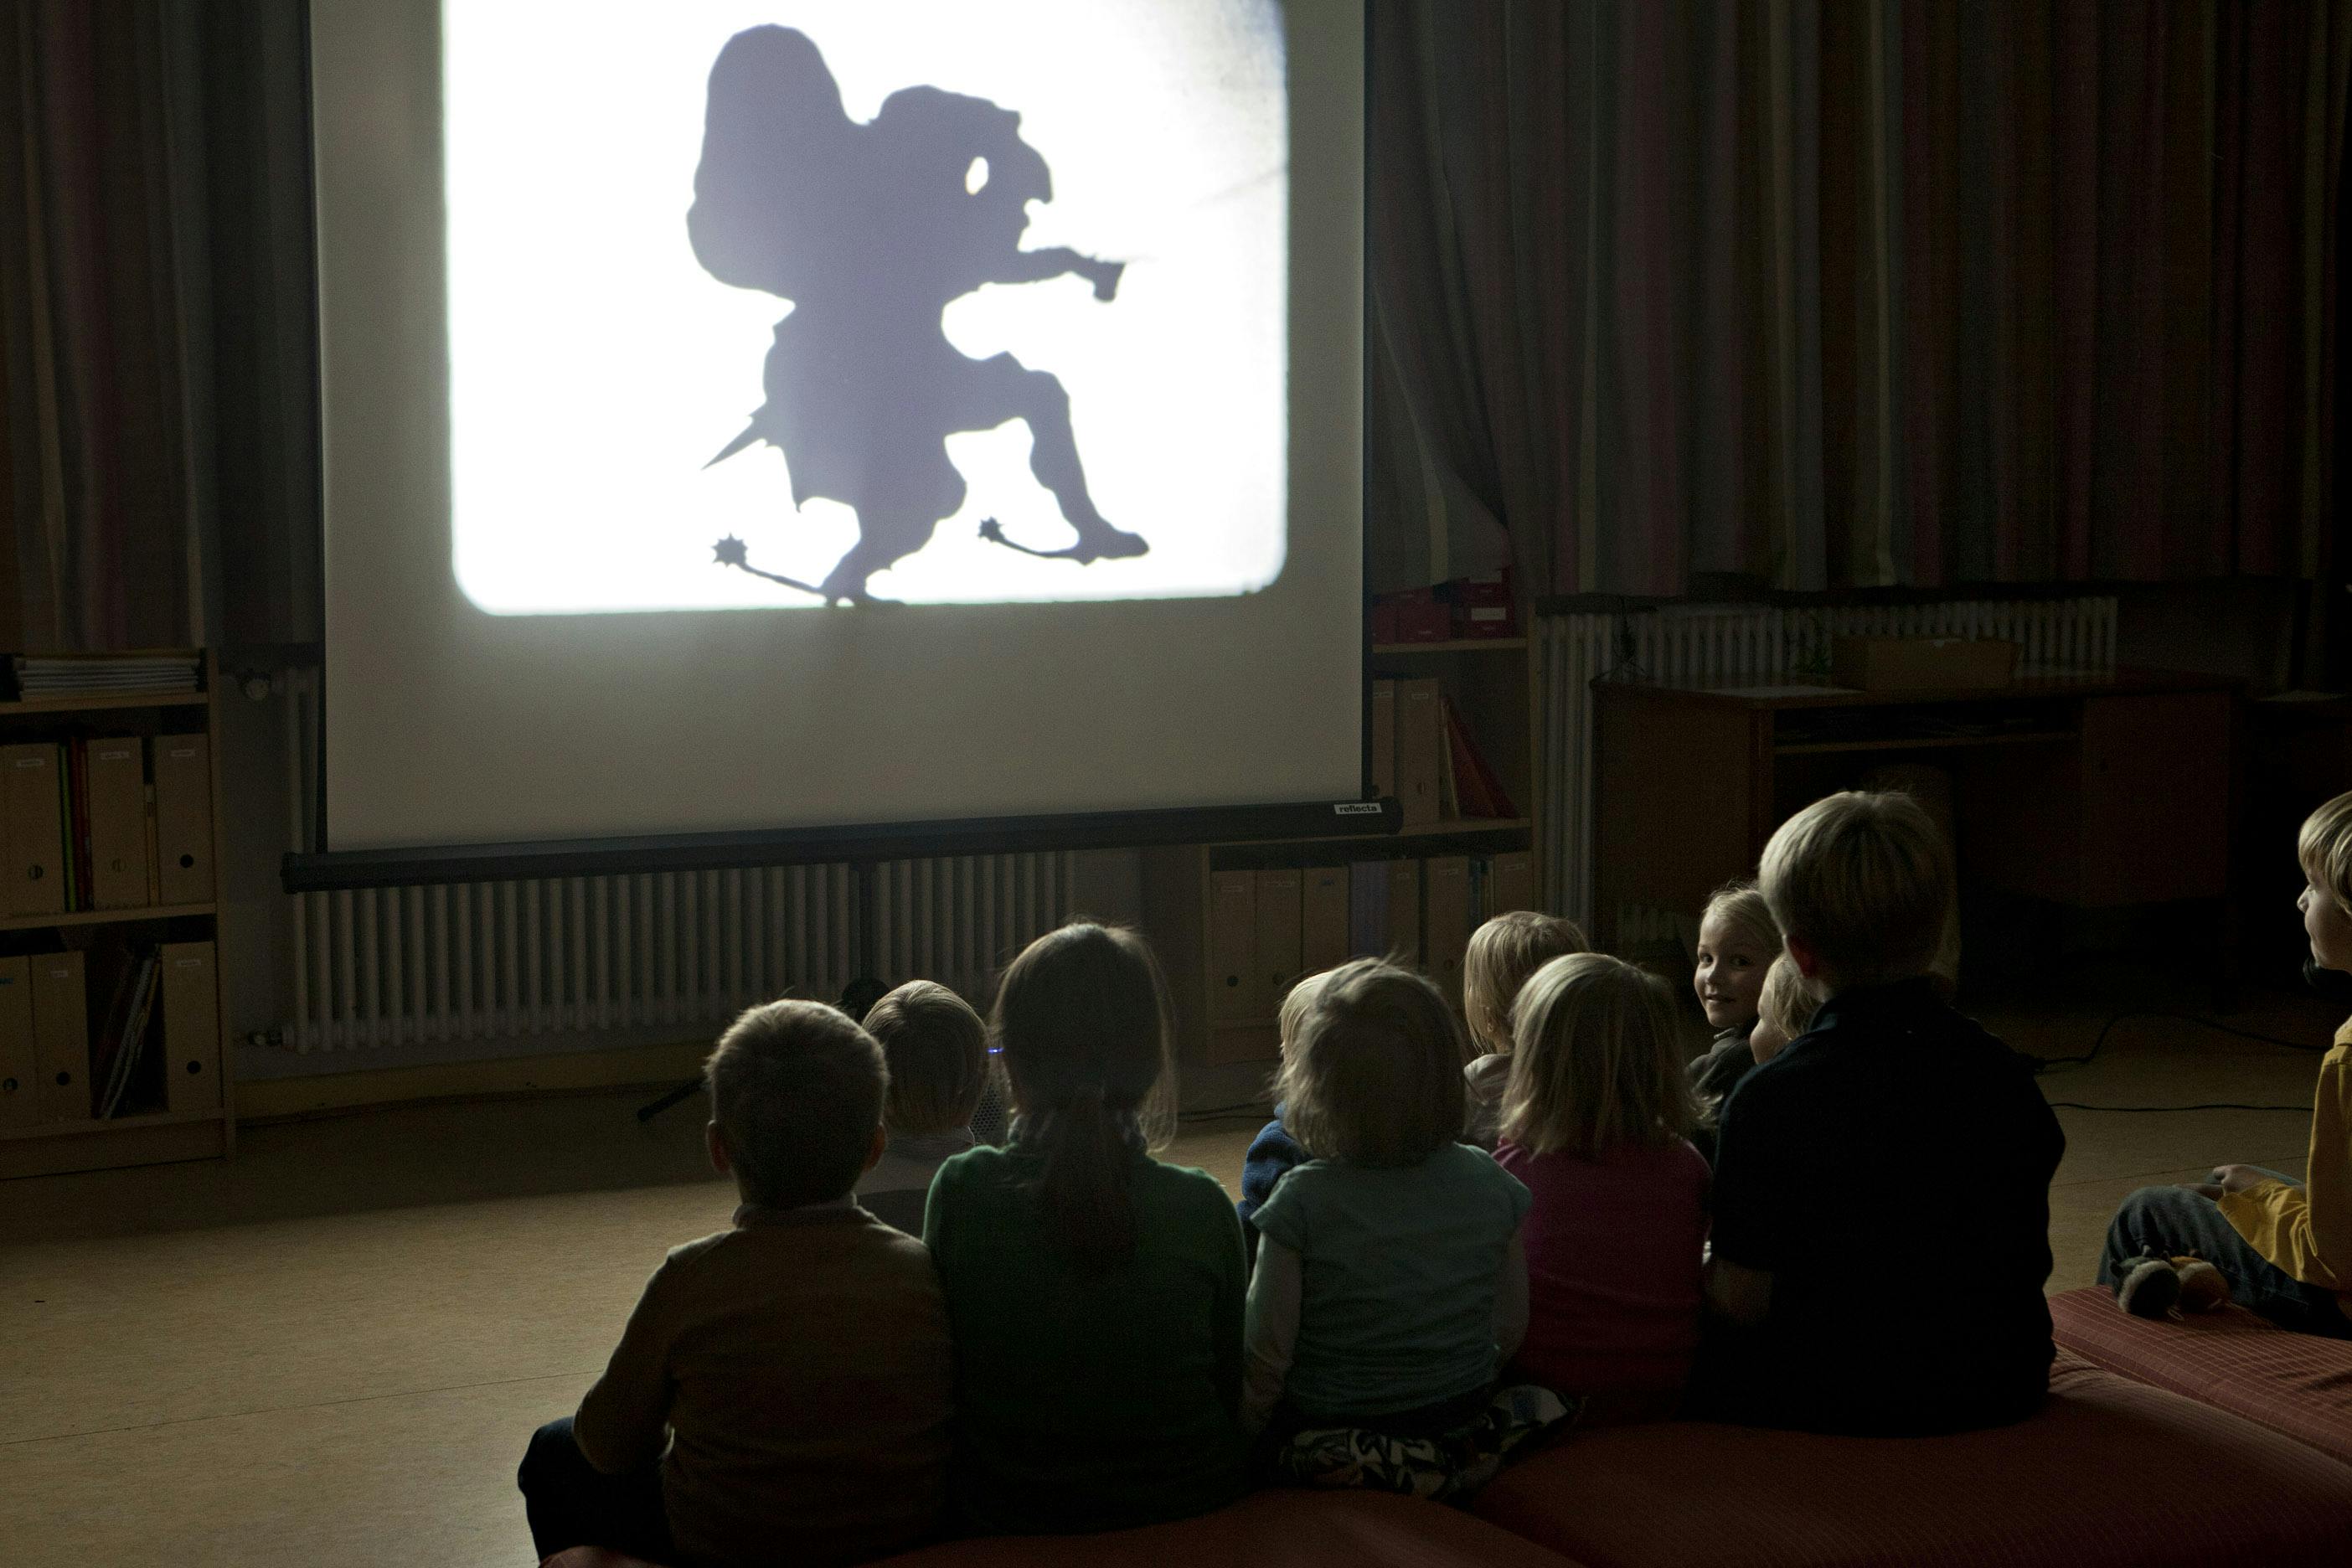 A group of young children sit in a darkened room in front of a screen watching a projected video. The video depicts a shadow puppet-like, human figure tip-toeing across the screen carrying a large sack.